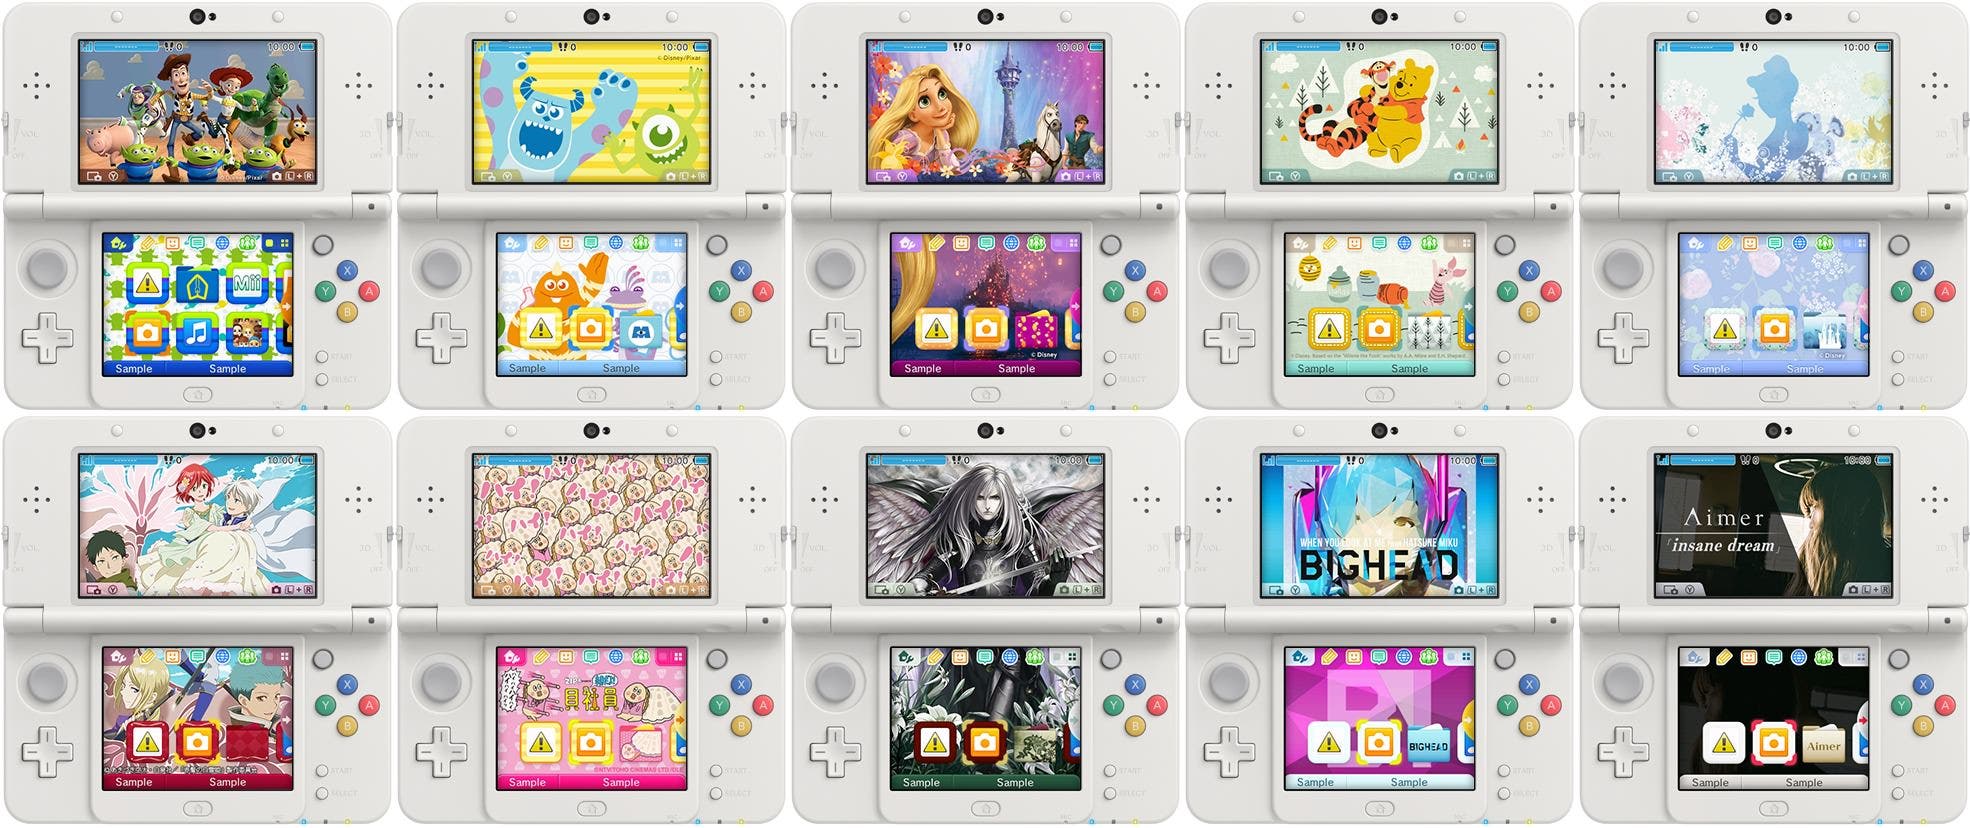 3ds-themes-jp-august-3